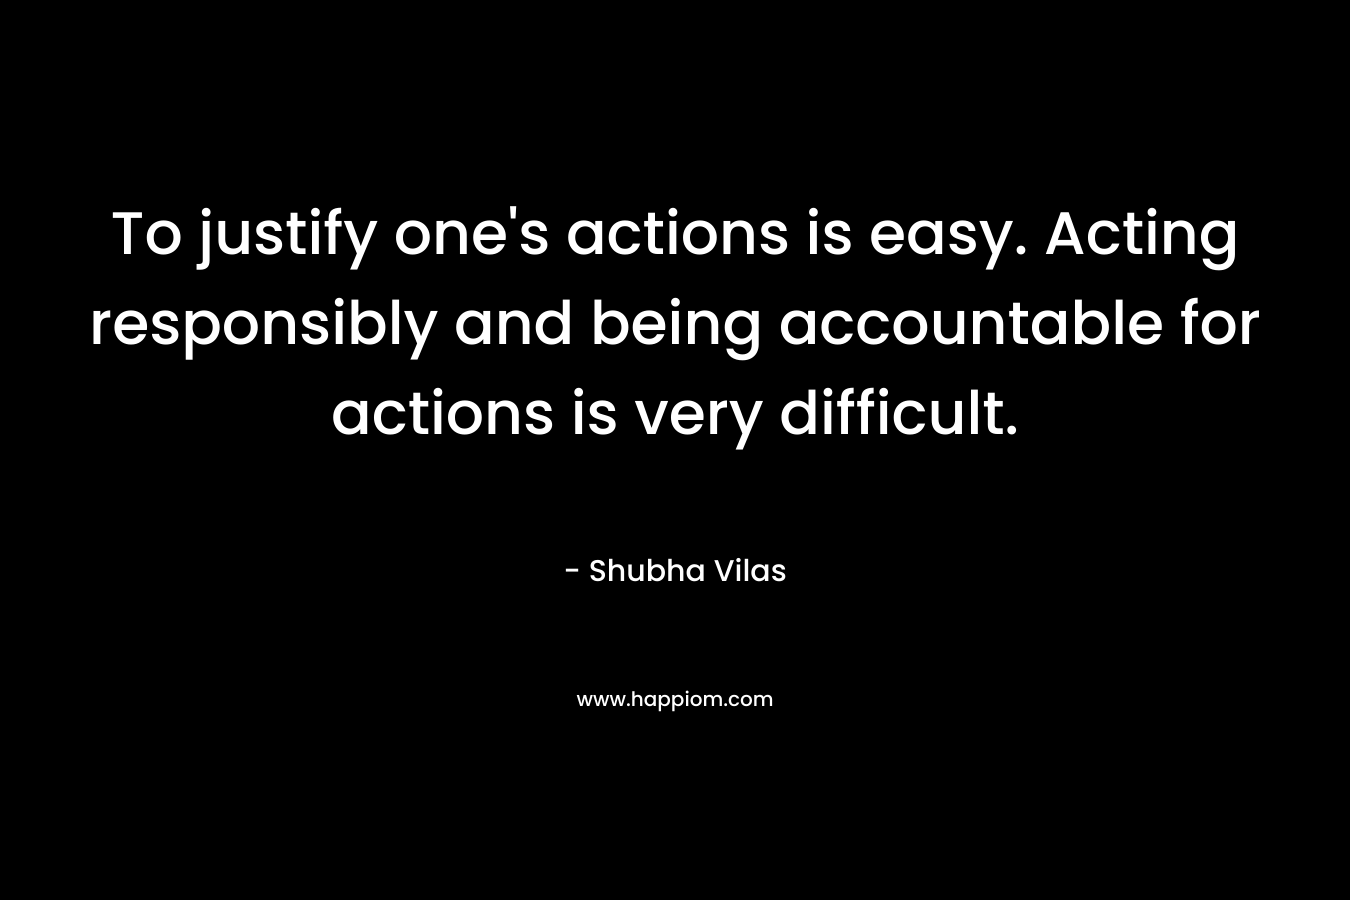 To justify one's actions is easy. Acting responsibly and being accountable for actions is very difficult.